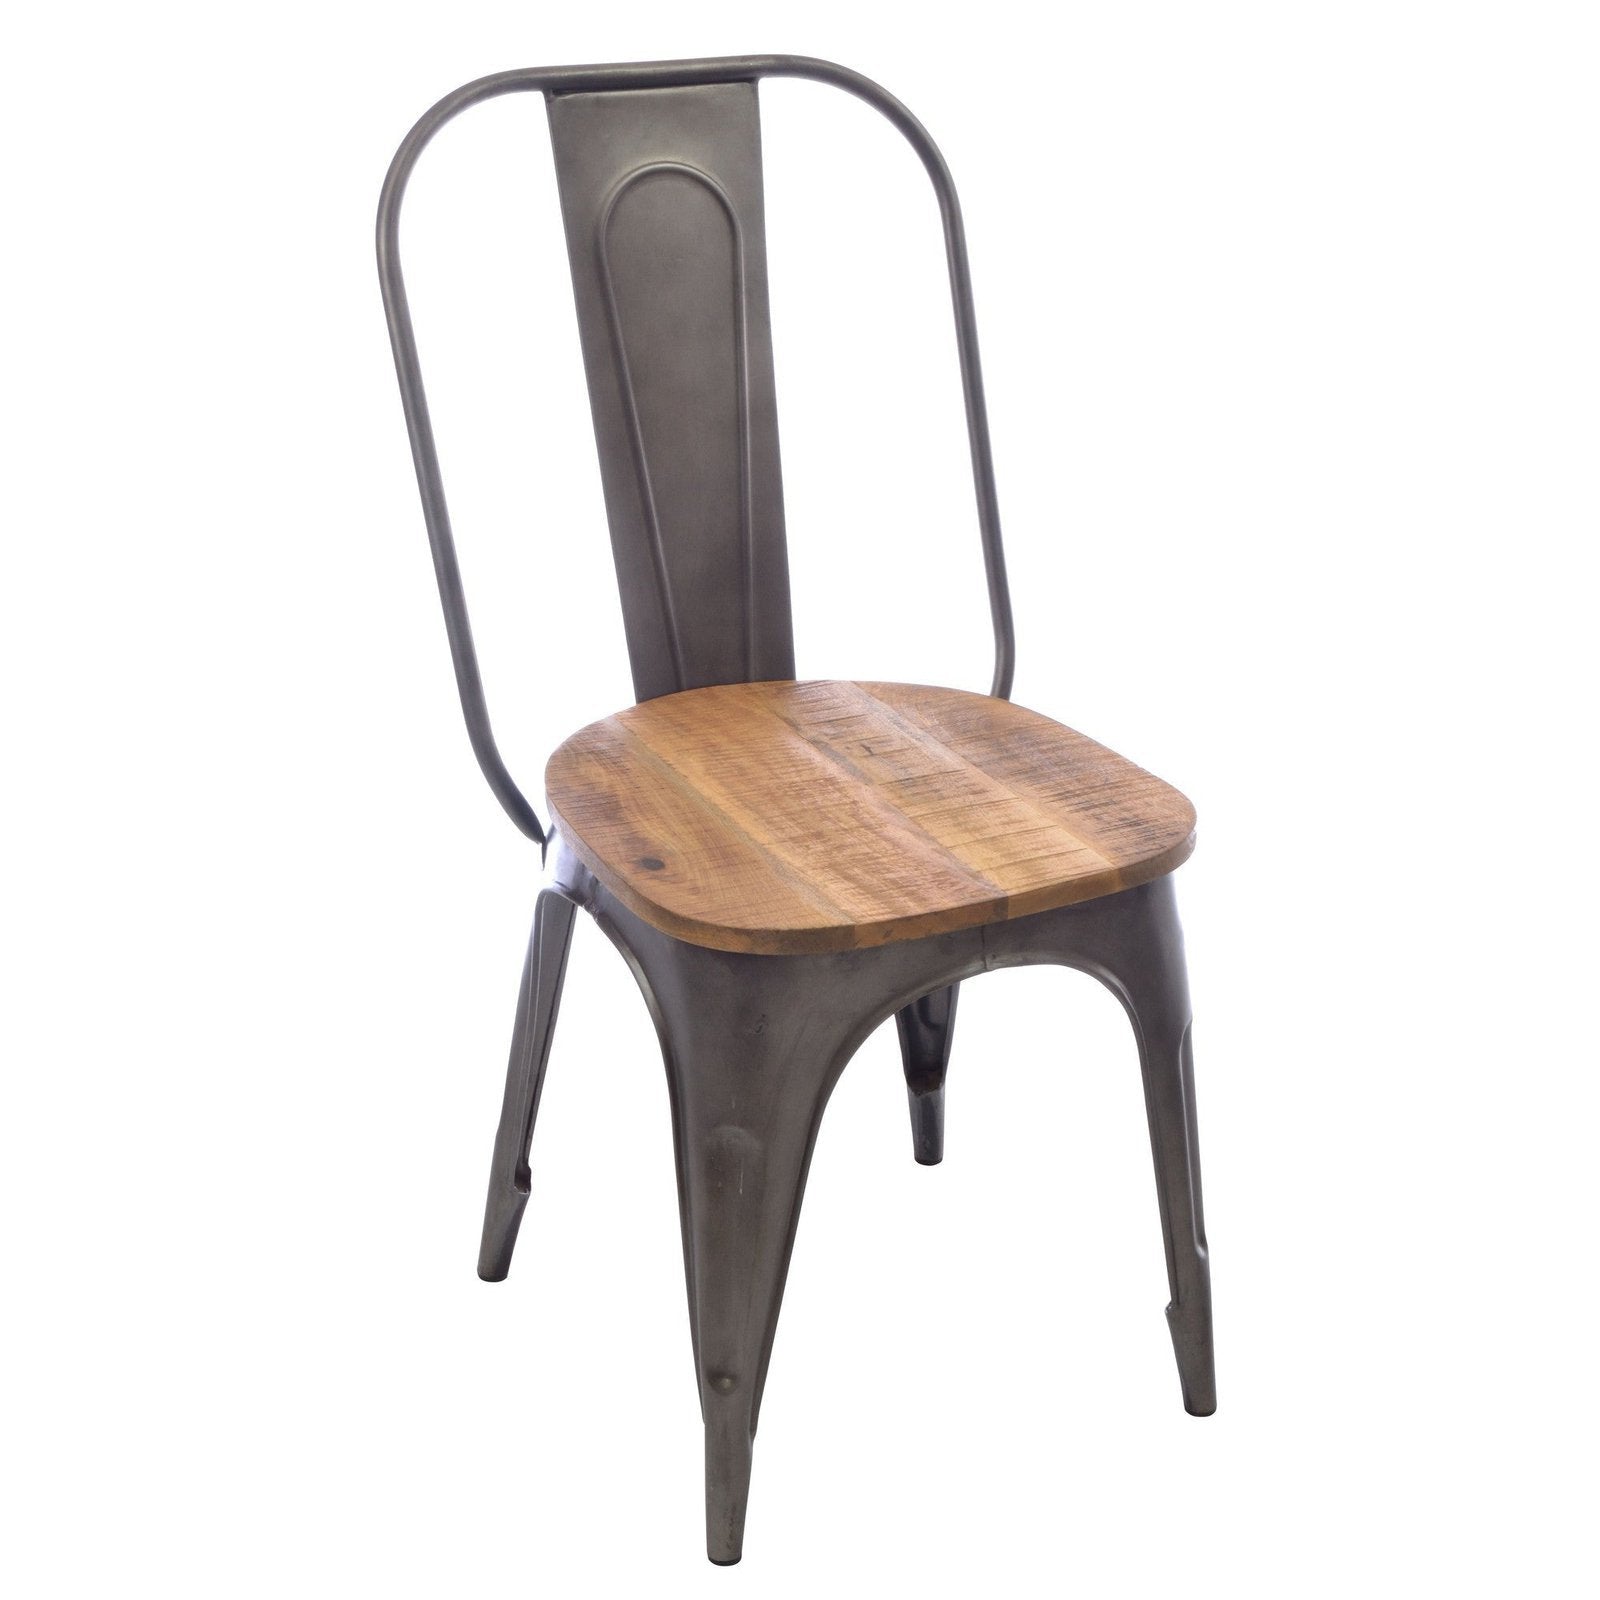 Old Empire Dining Chair